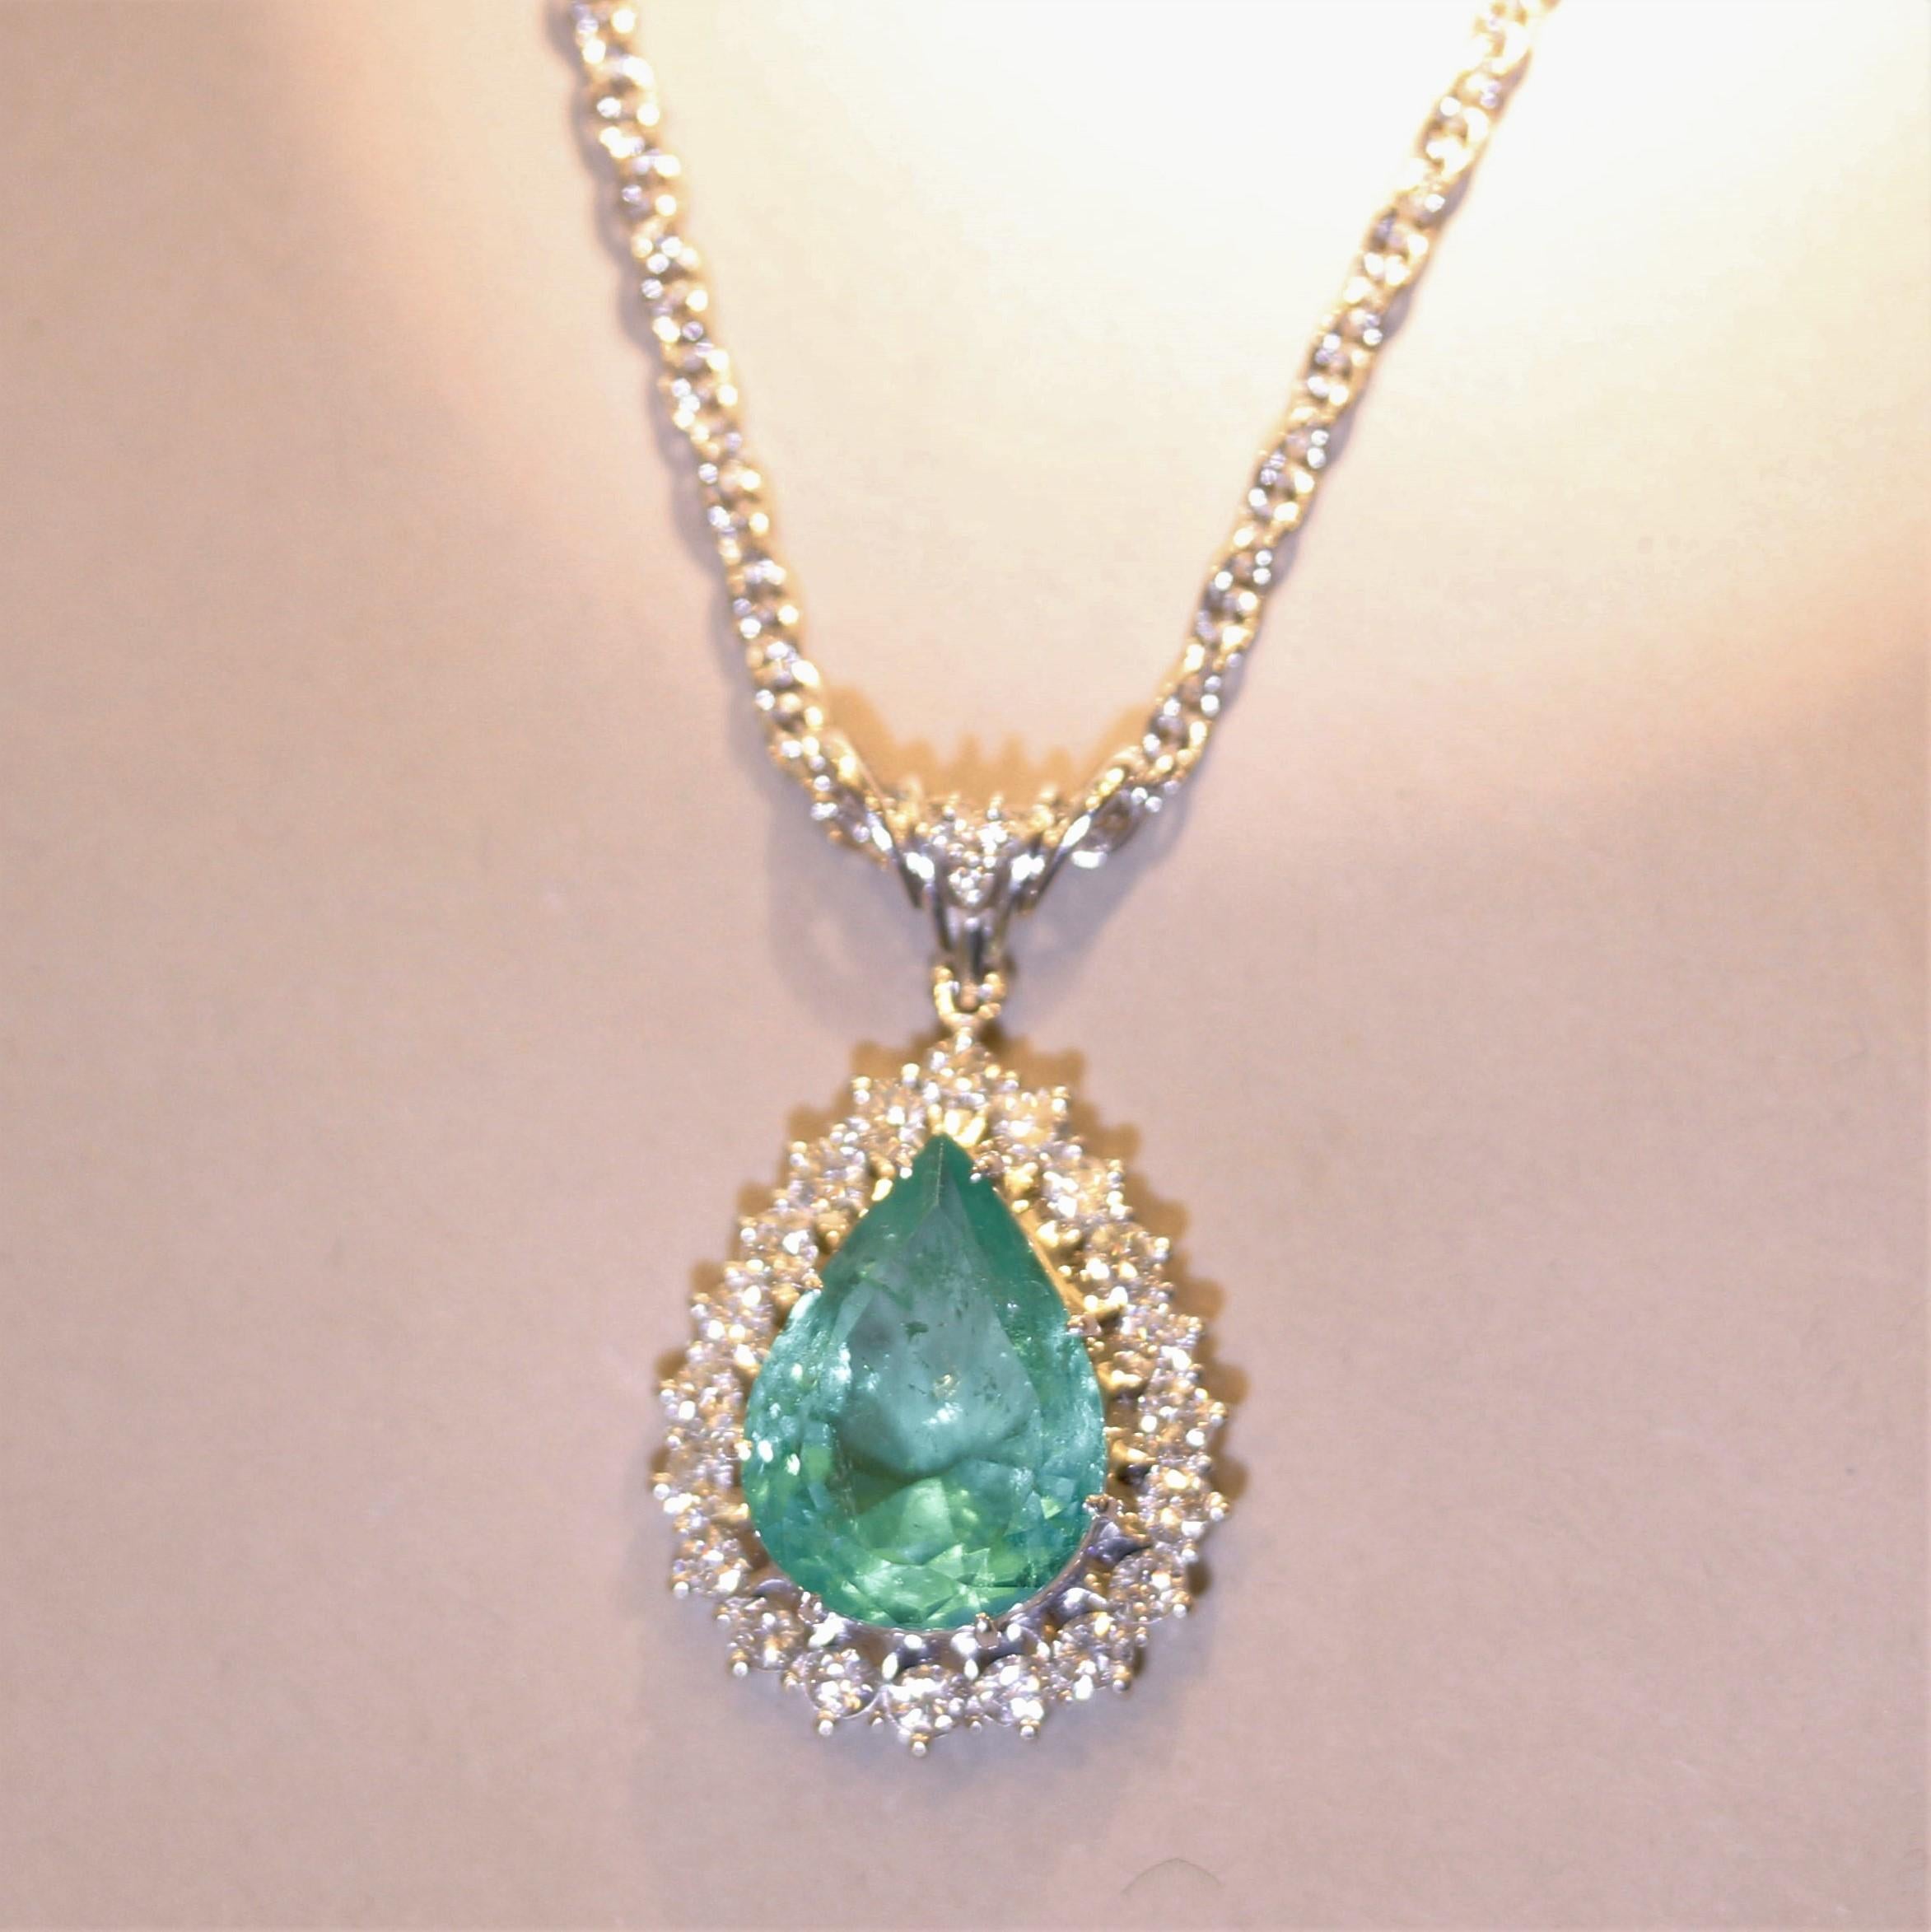 A fine GIA certified Colombian emerald weighing 10.38 carats! The pear-shaped gem has a luscious vivid green color and is free of major inclusions usually found in emeralds. This allows the stone's natural brilliance to come out and its color to